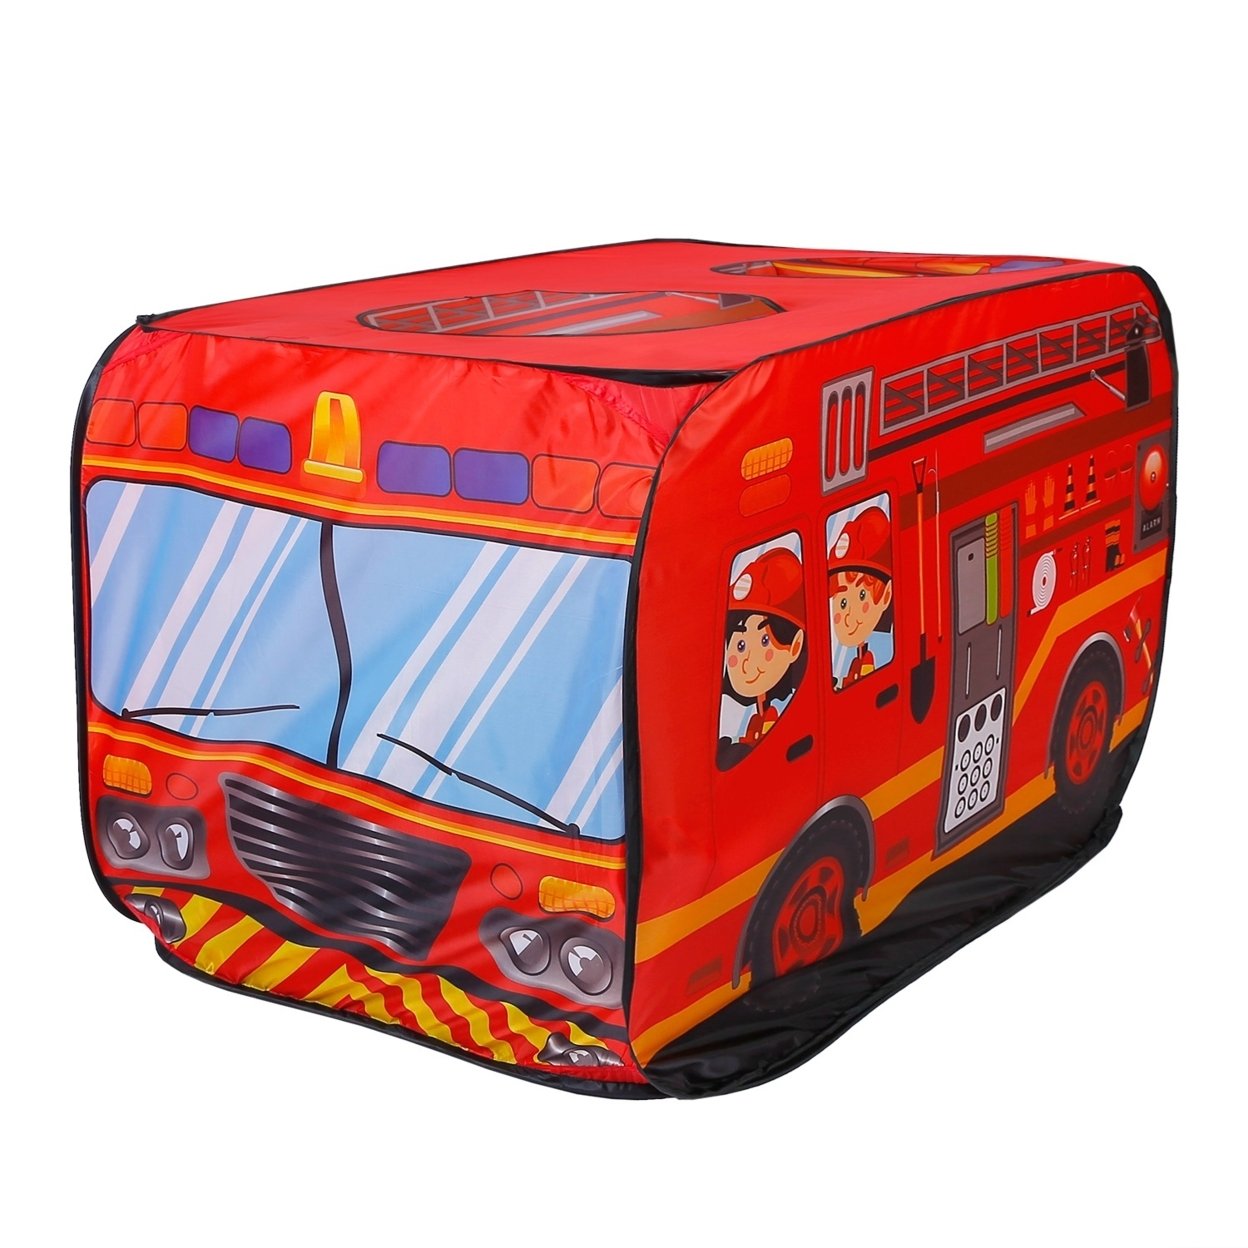 GLOBAL PHOENIX Kids Play Tent Foldable Pop Up Children Play House with Carry Bag redfiretrucktent